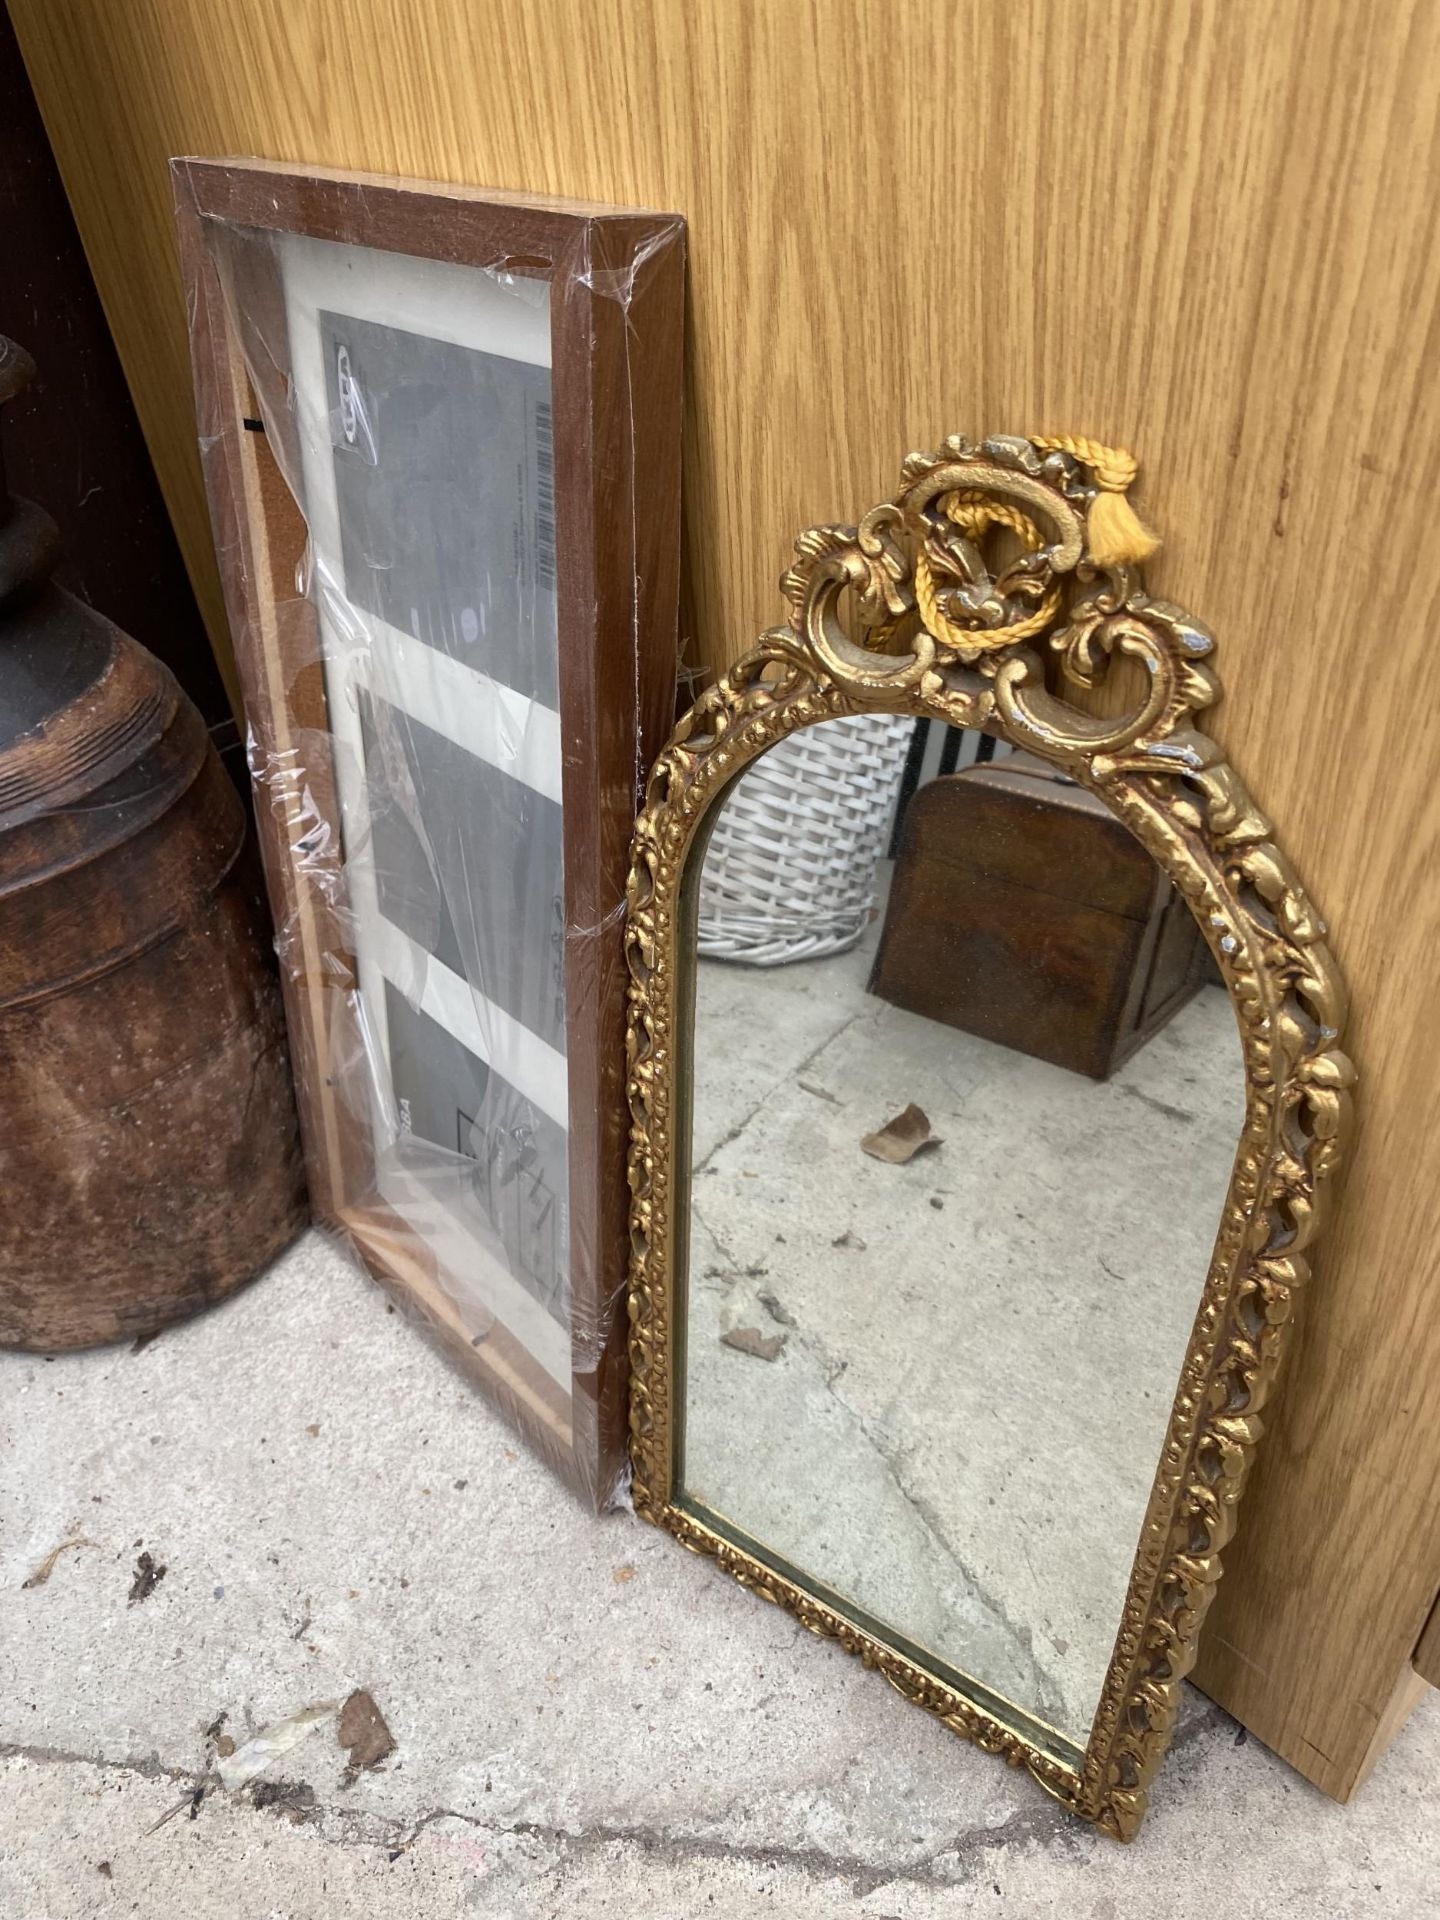 A TREEN VASE, A GILT FRAMED MIRROR AND A PICTURE FRAME - Image 2 of 4